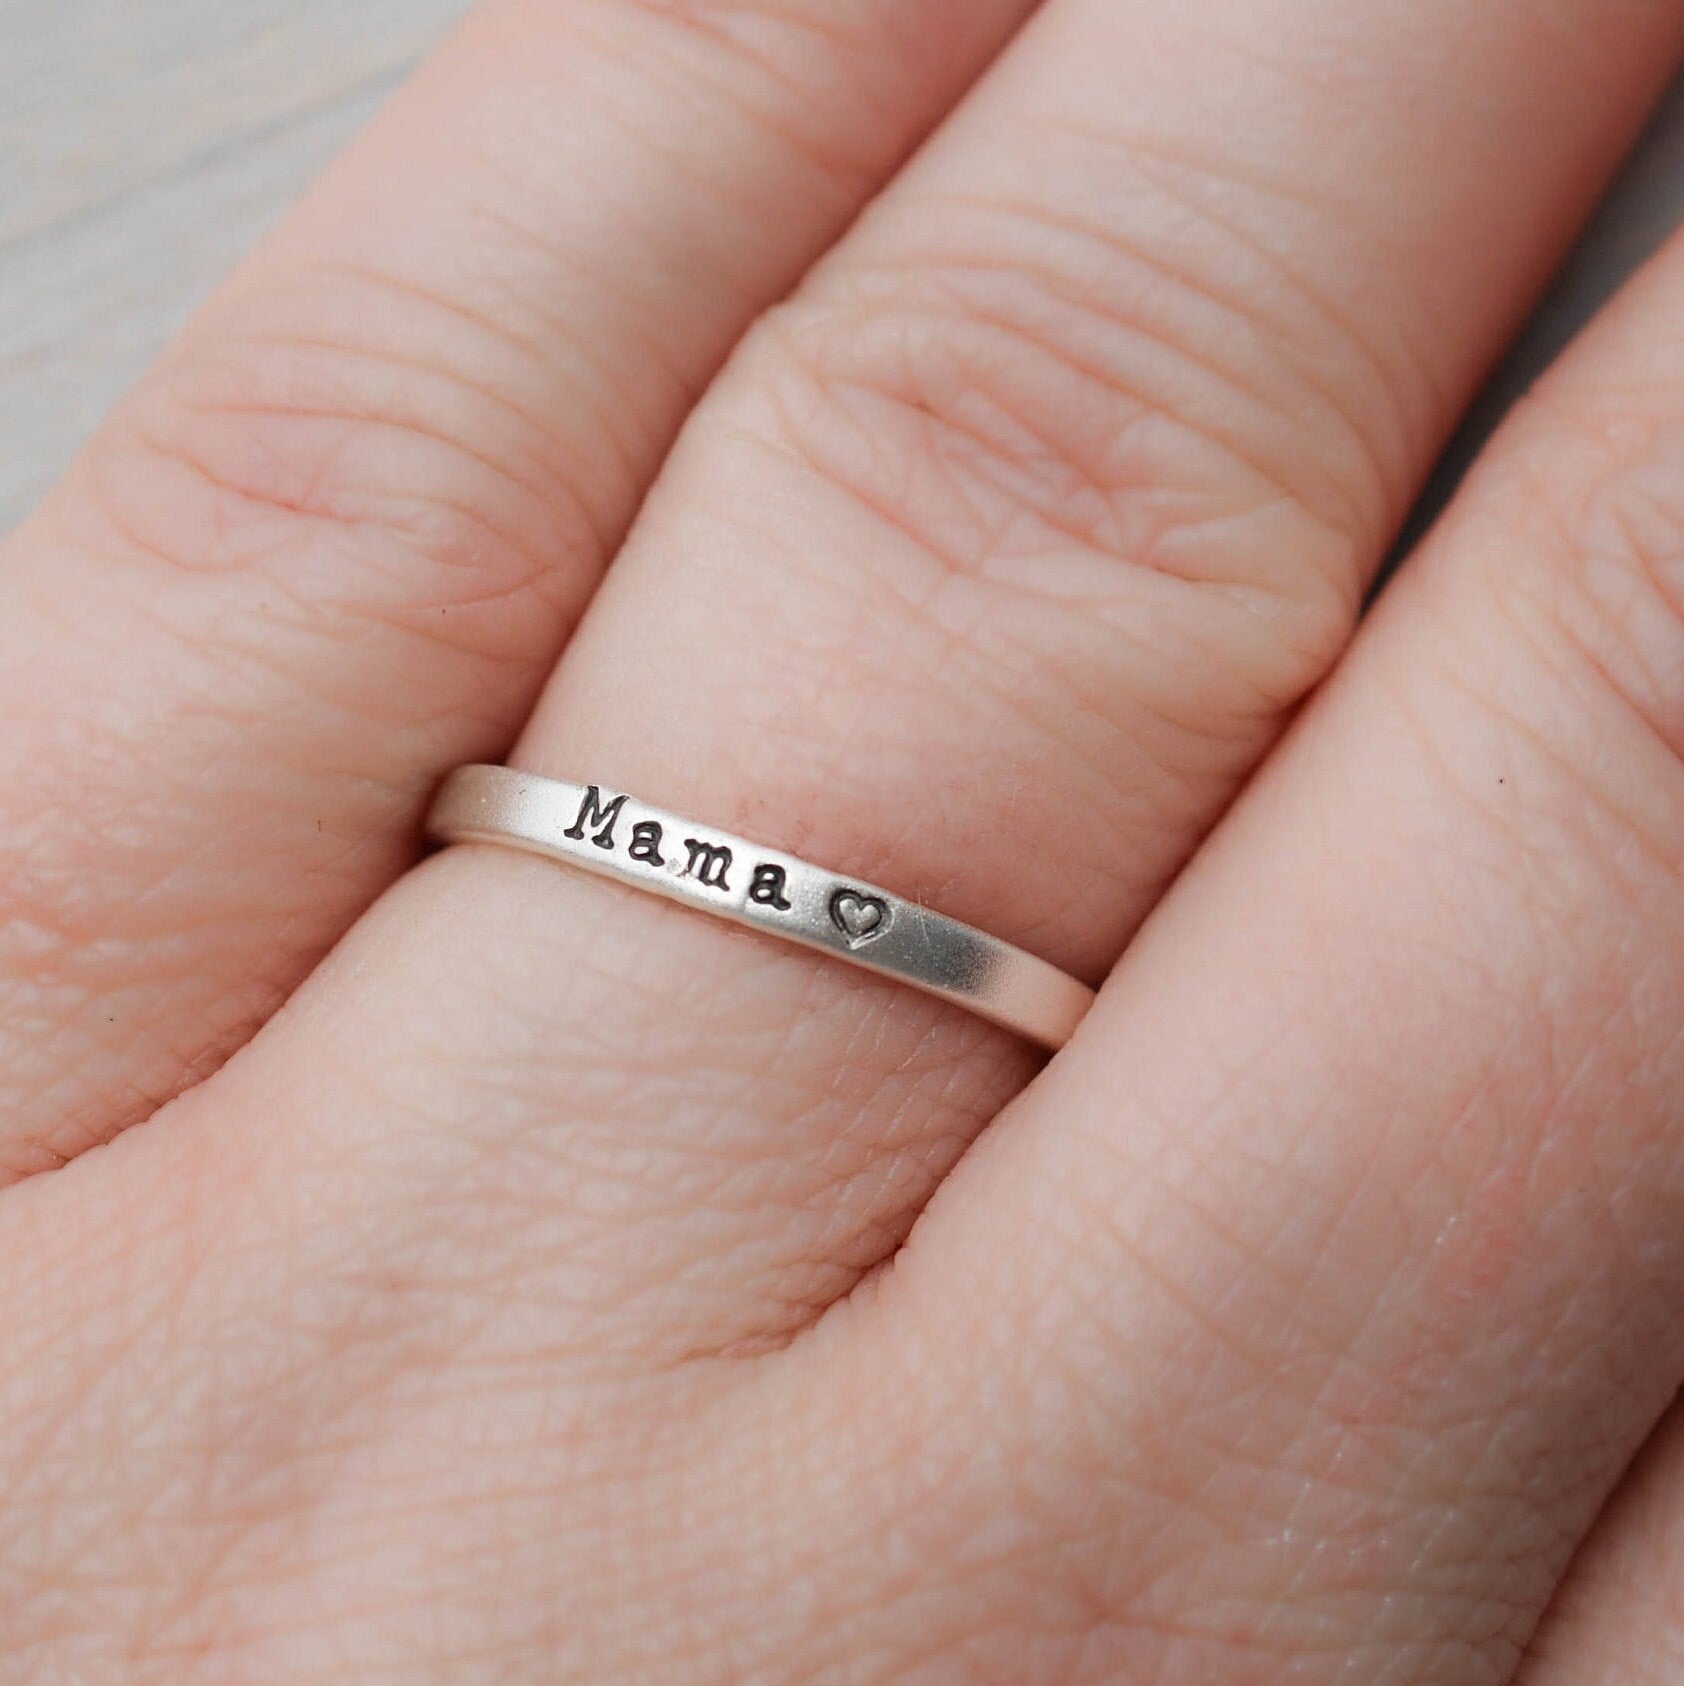 Sterling silver ring handstamped with Mama and one heart on hand